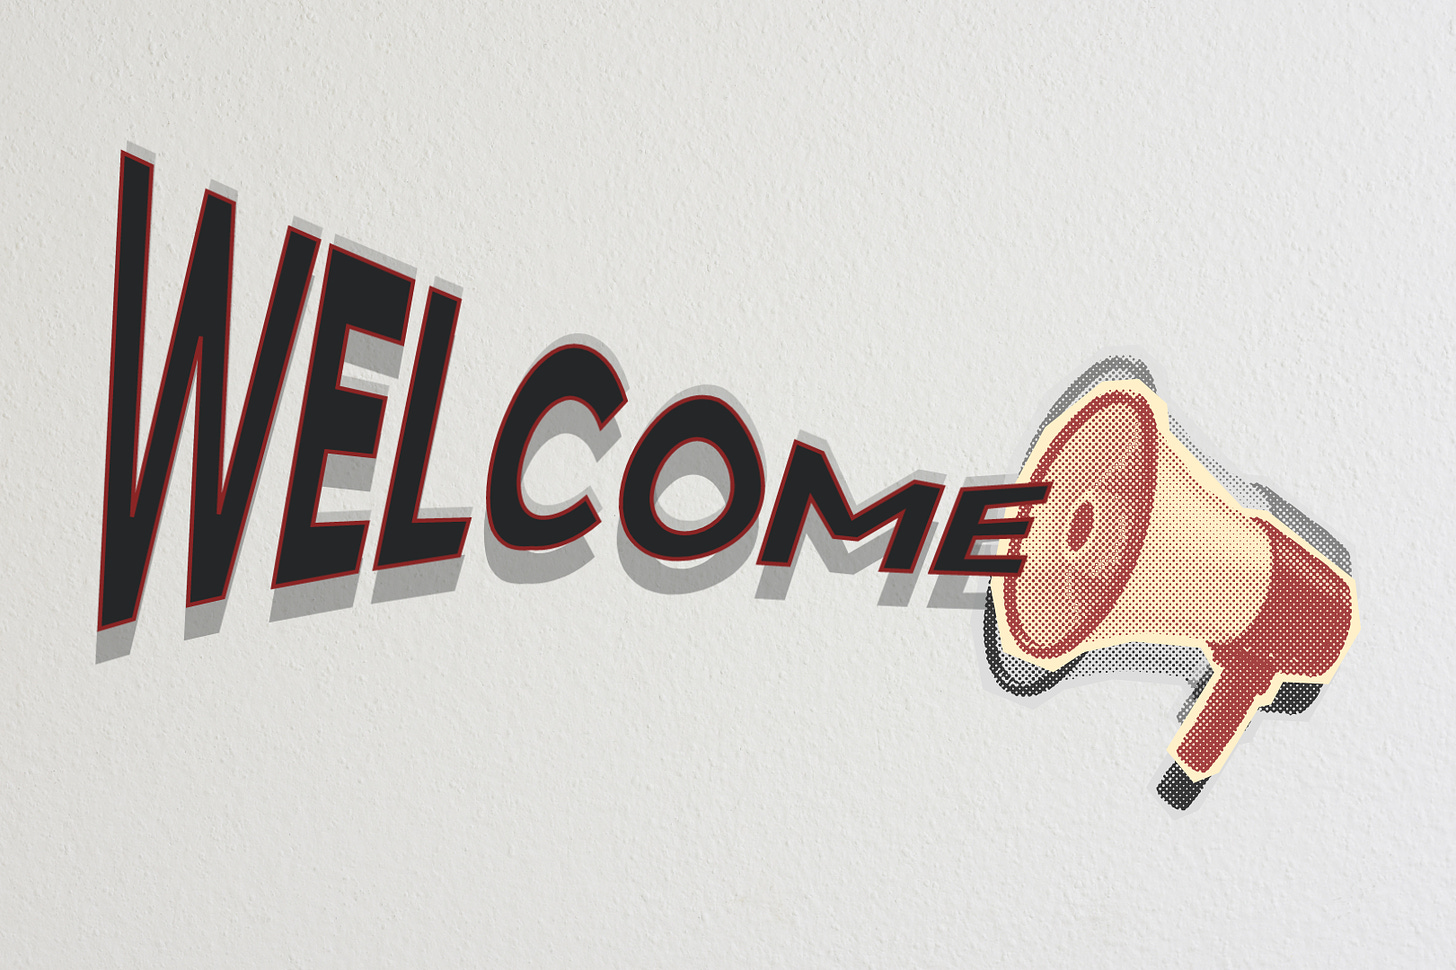 the 'welcome' comes out of a megaphone.